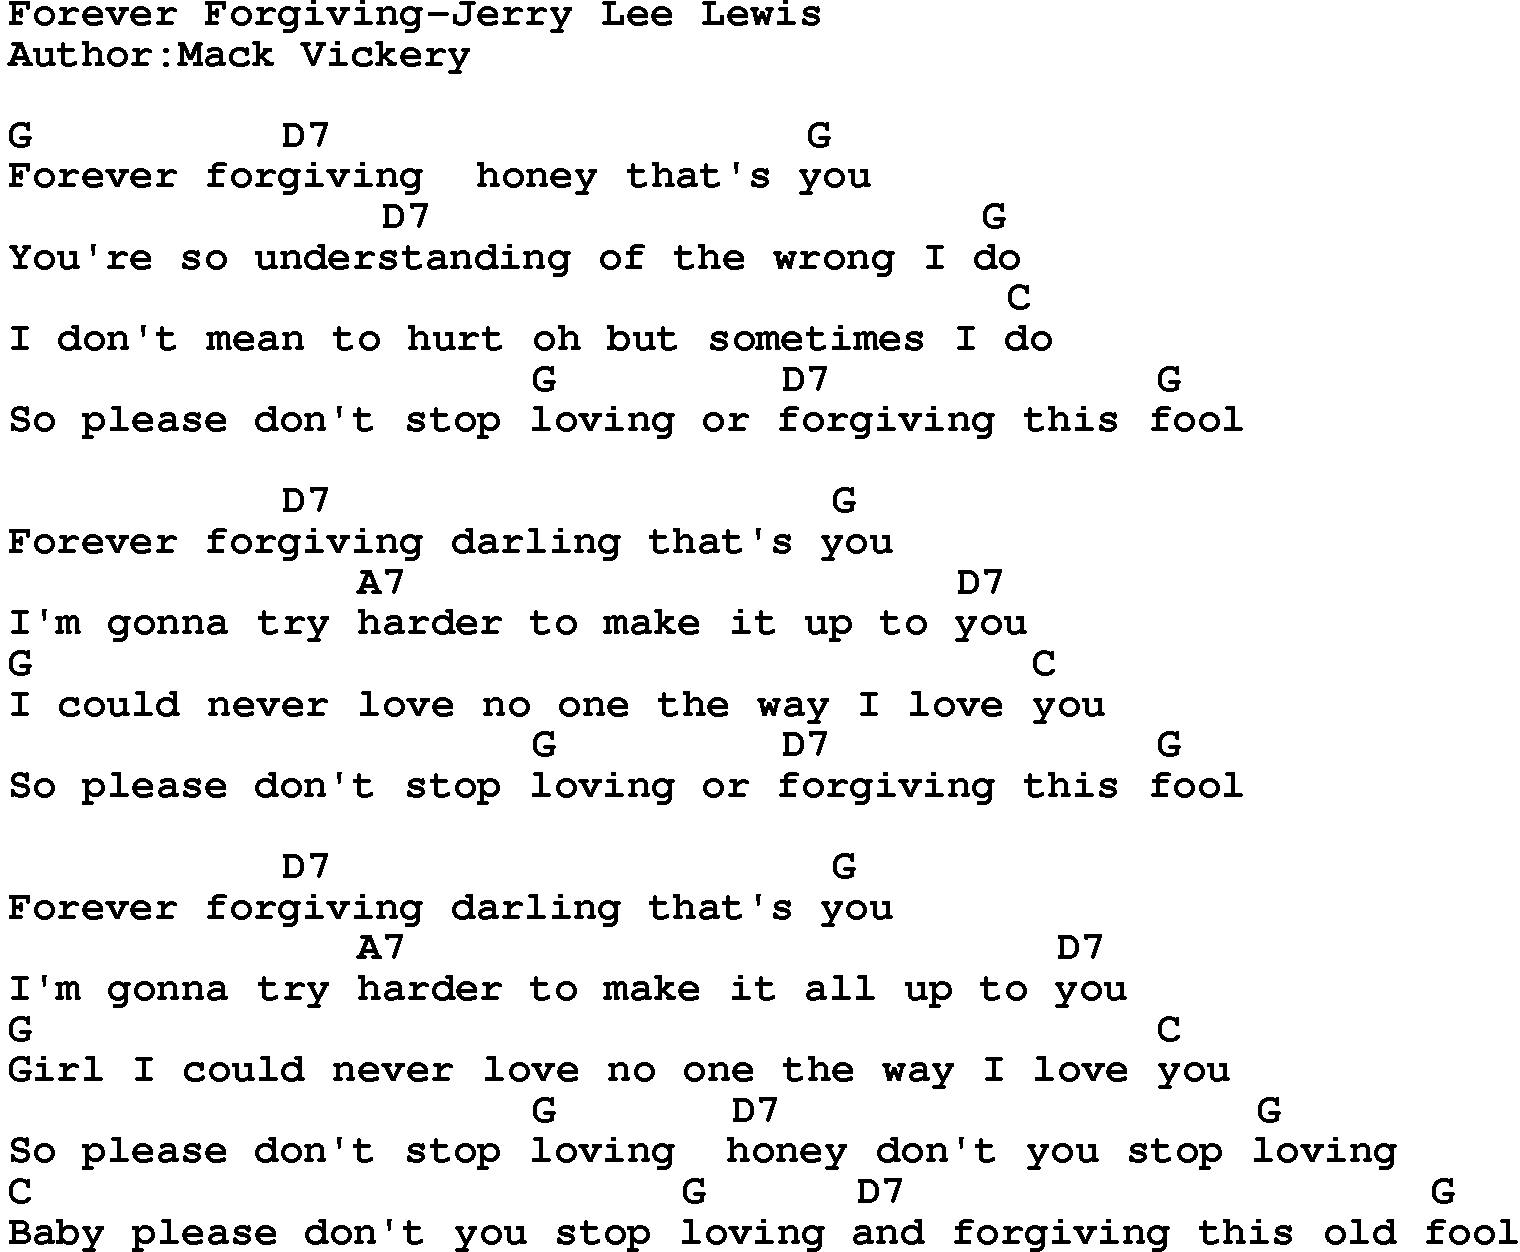 Country music song: Forever Forgiving-Jerry Lee Lewis lyrics and chords